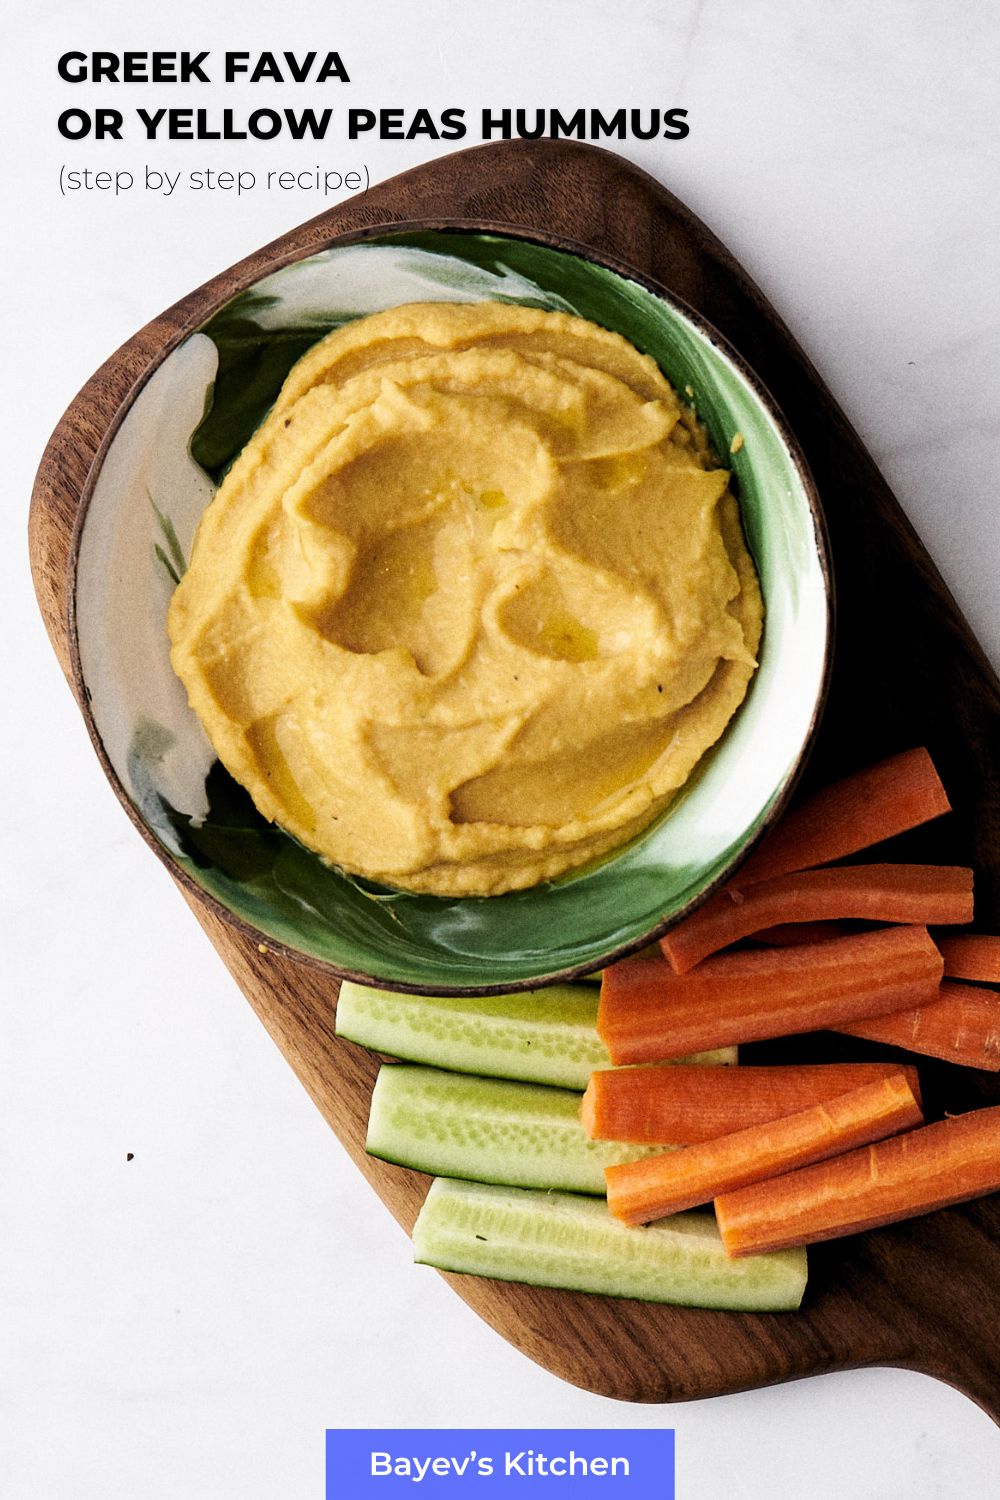 Greek Fava or yellow peas hummus recipe with step by step directions.